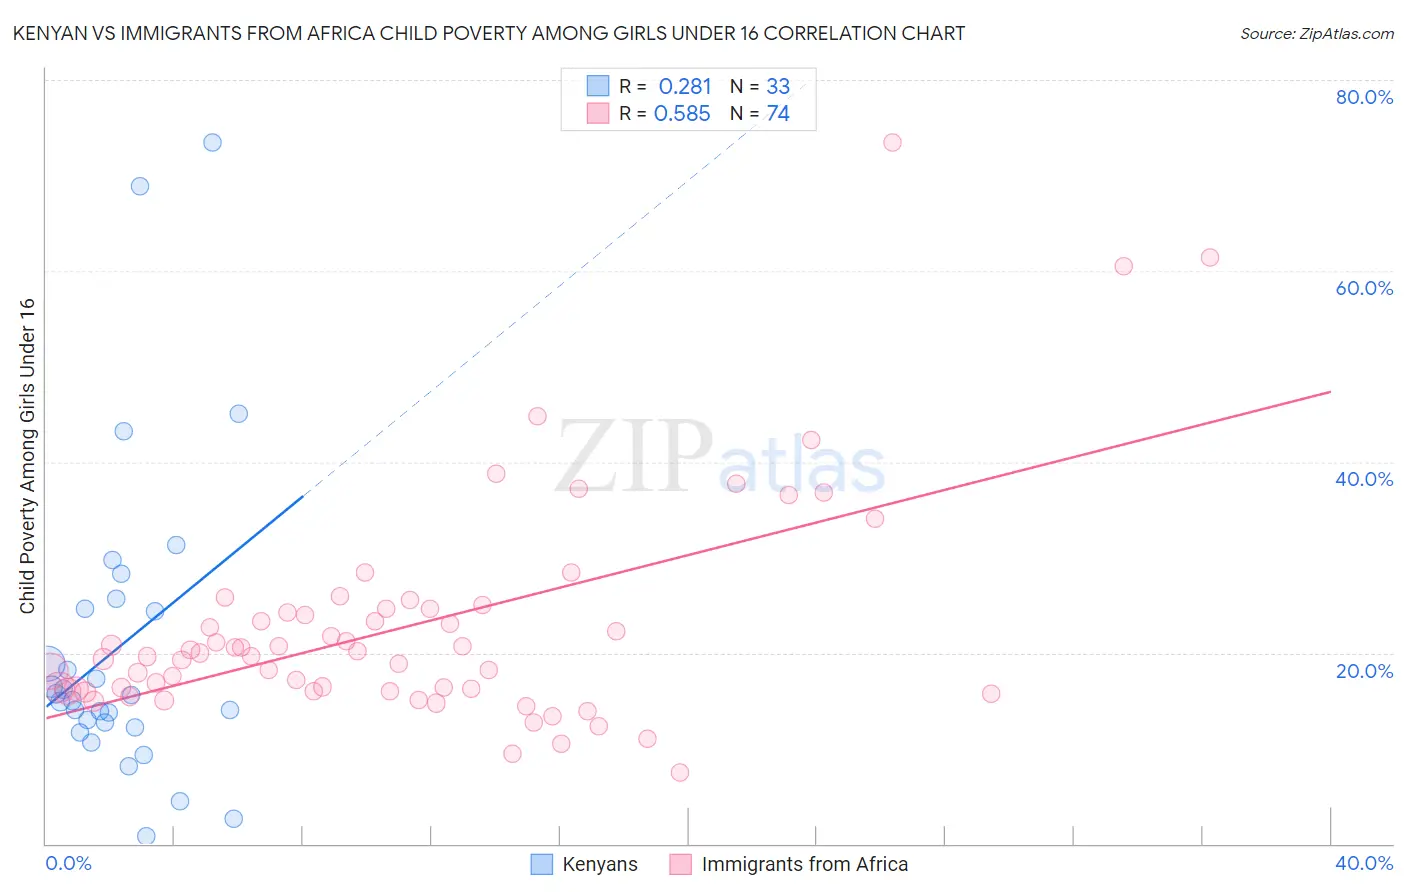 Kenyan vs Immigrants from Africa Child Poverty Among Girls Under 16